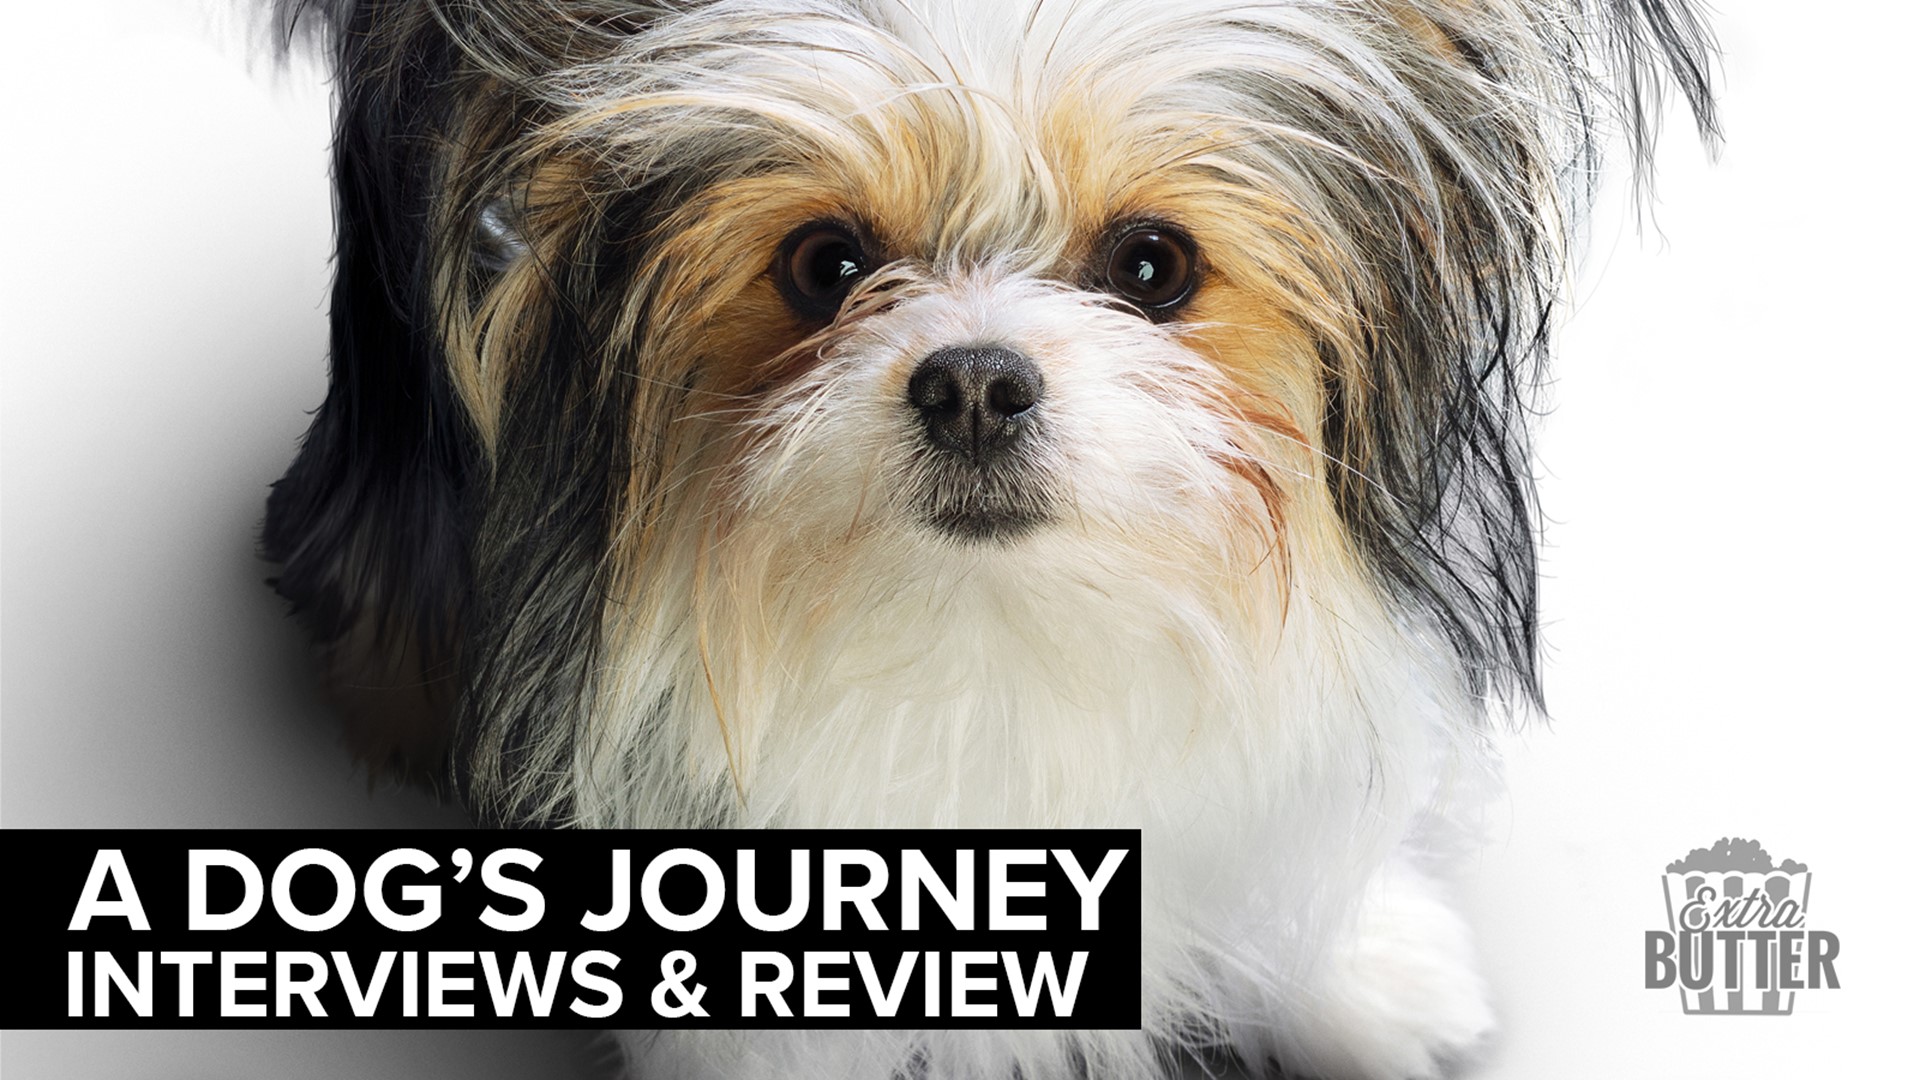 Hear from the stars of the movie 'A Dog's Journey.' Dennis Quaid & Marg Helgenberger talk about working with dogs and kids. Also Kathryn Prescott & Henry Lau.